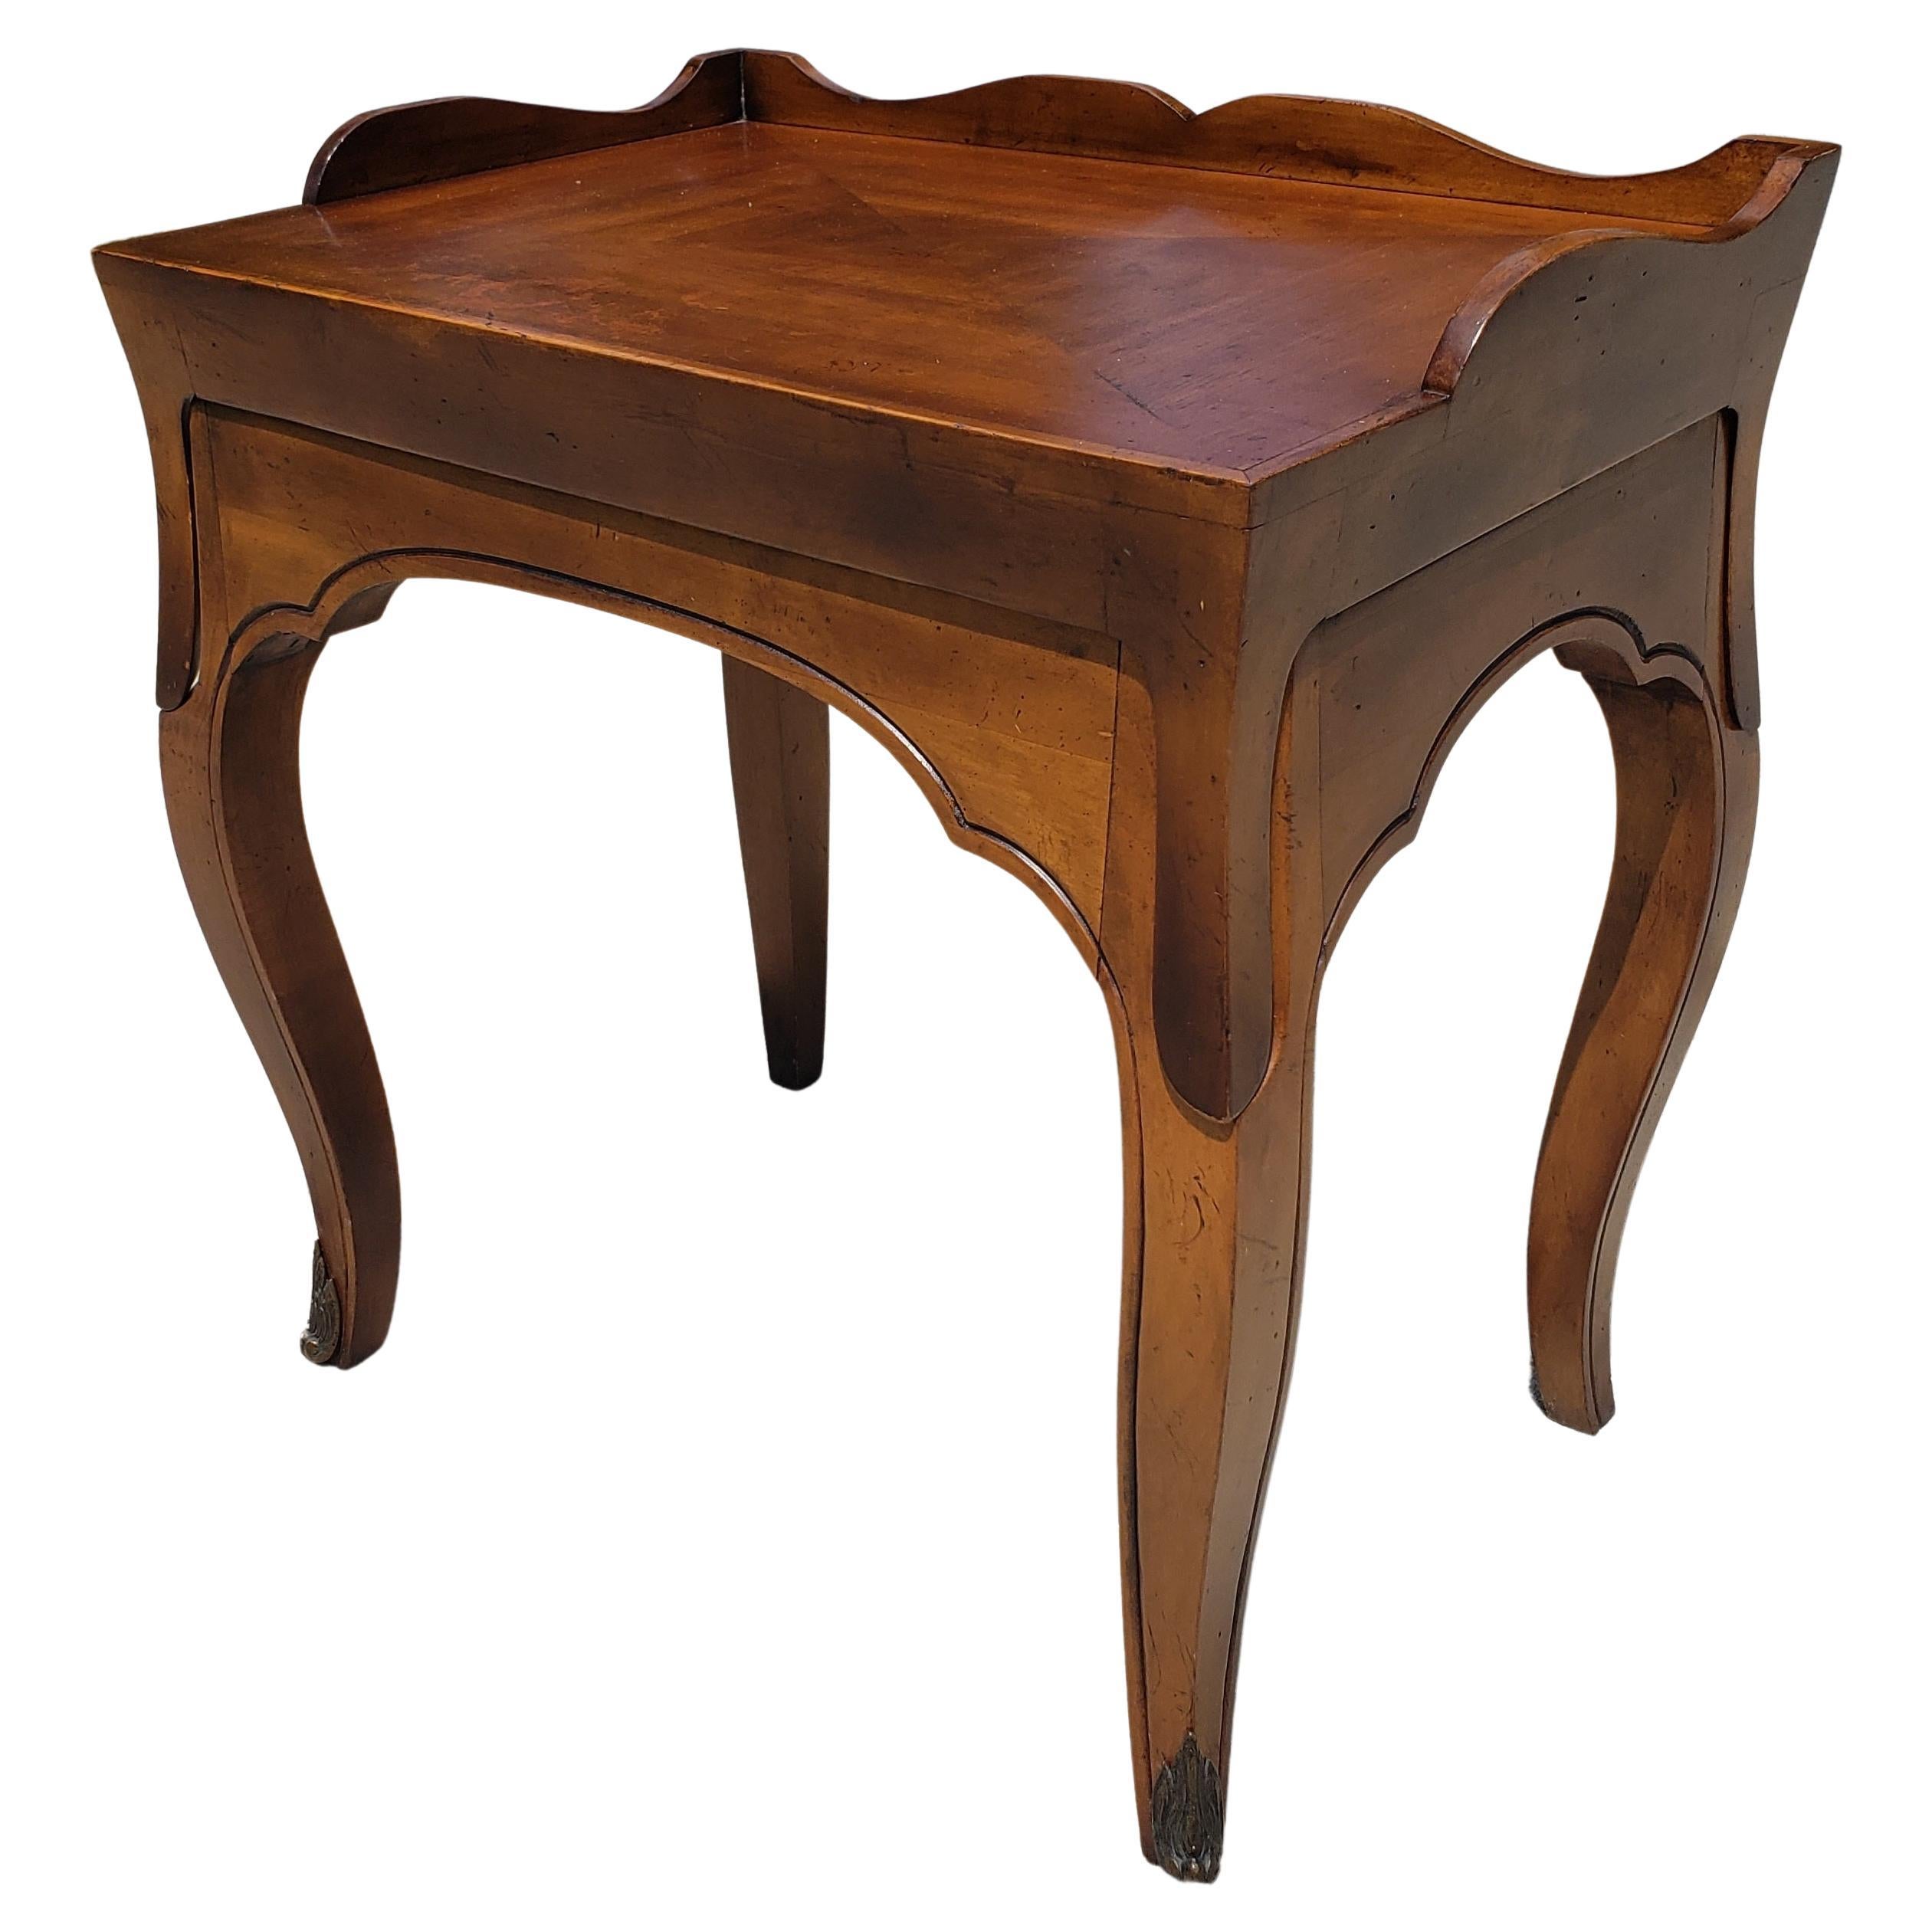 A rare Rococo Style Cherry Side Table with Removable footed Tray Top
measuring 24.75' in width, 17.75